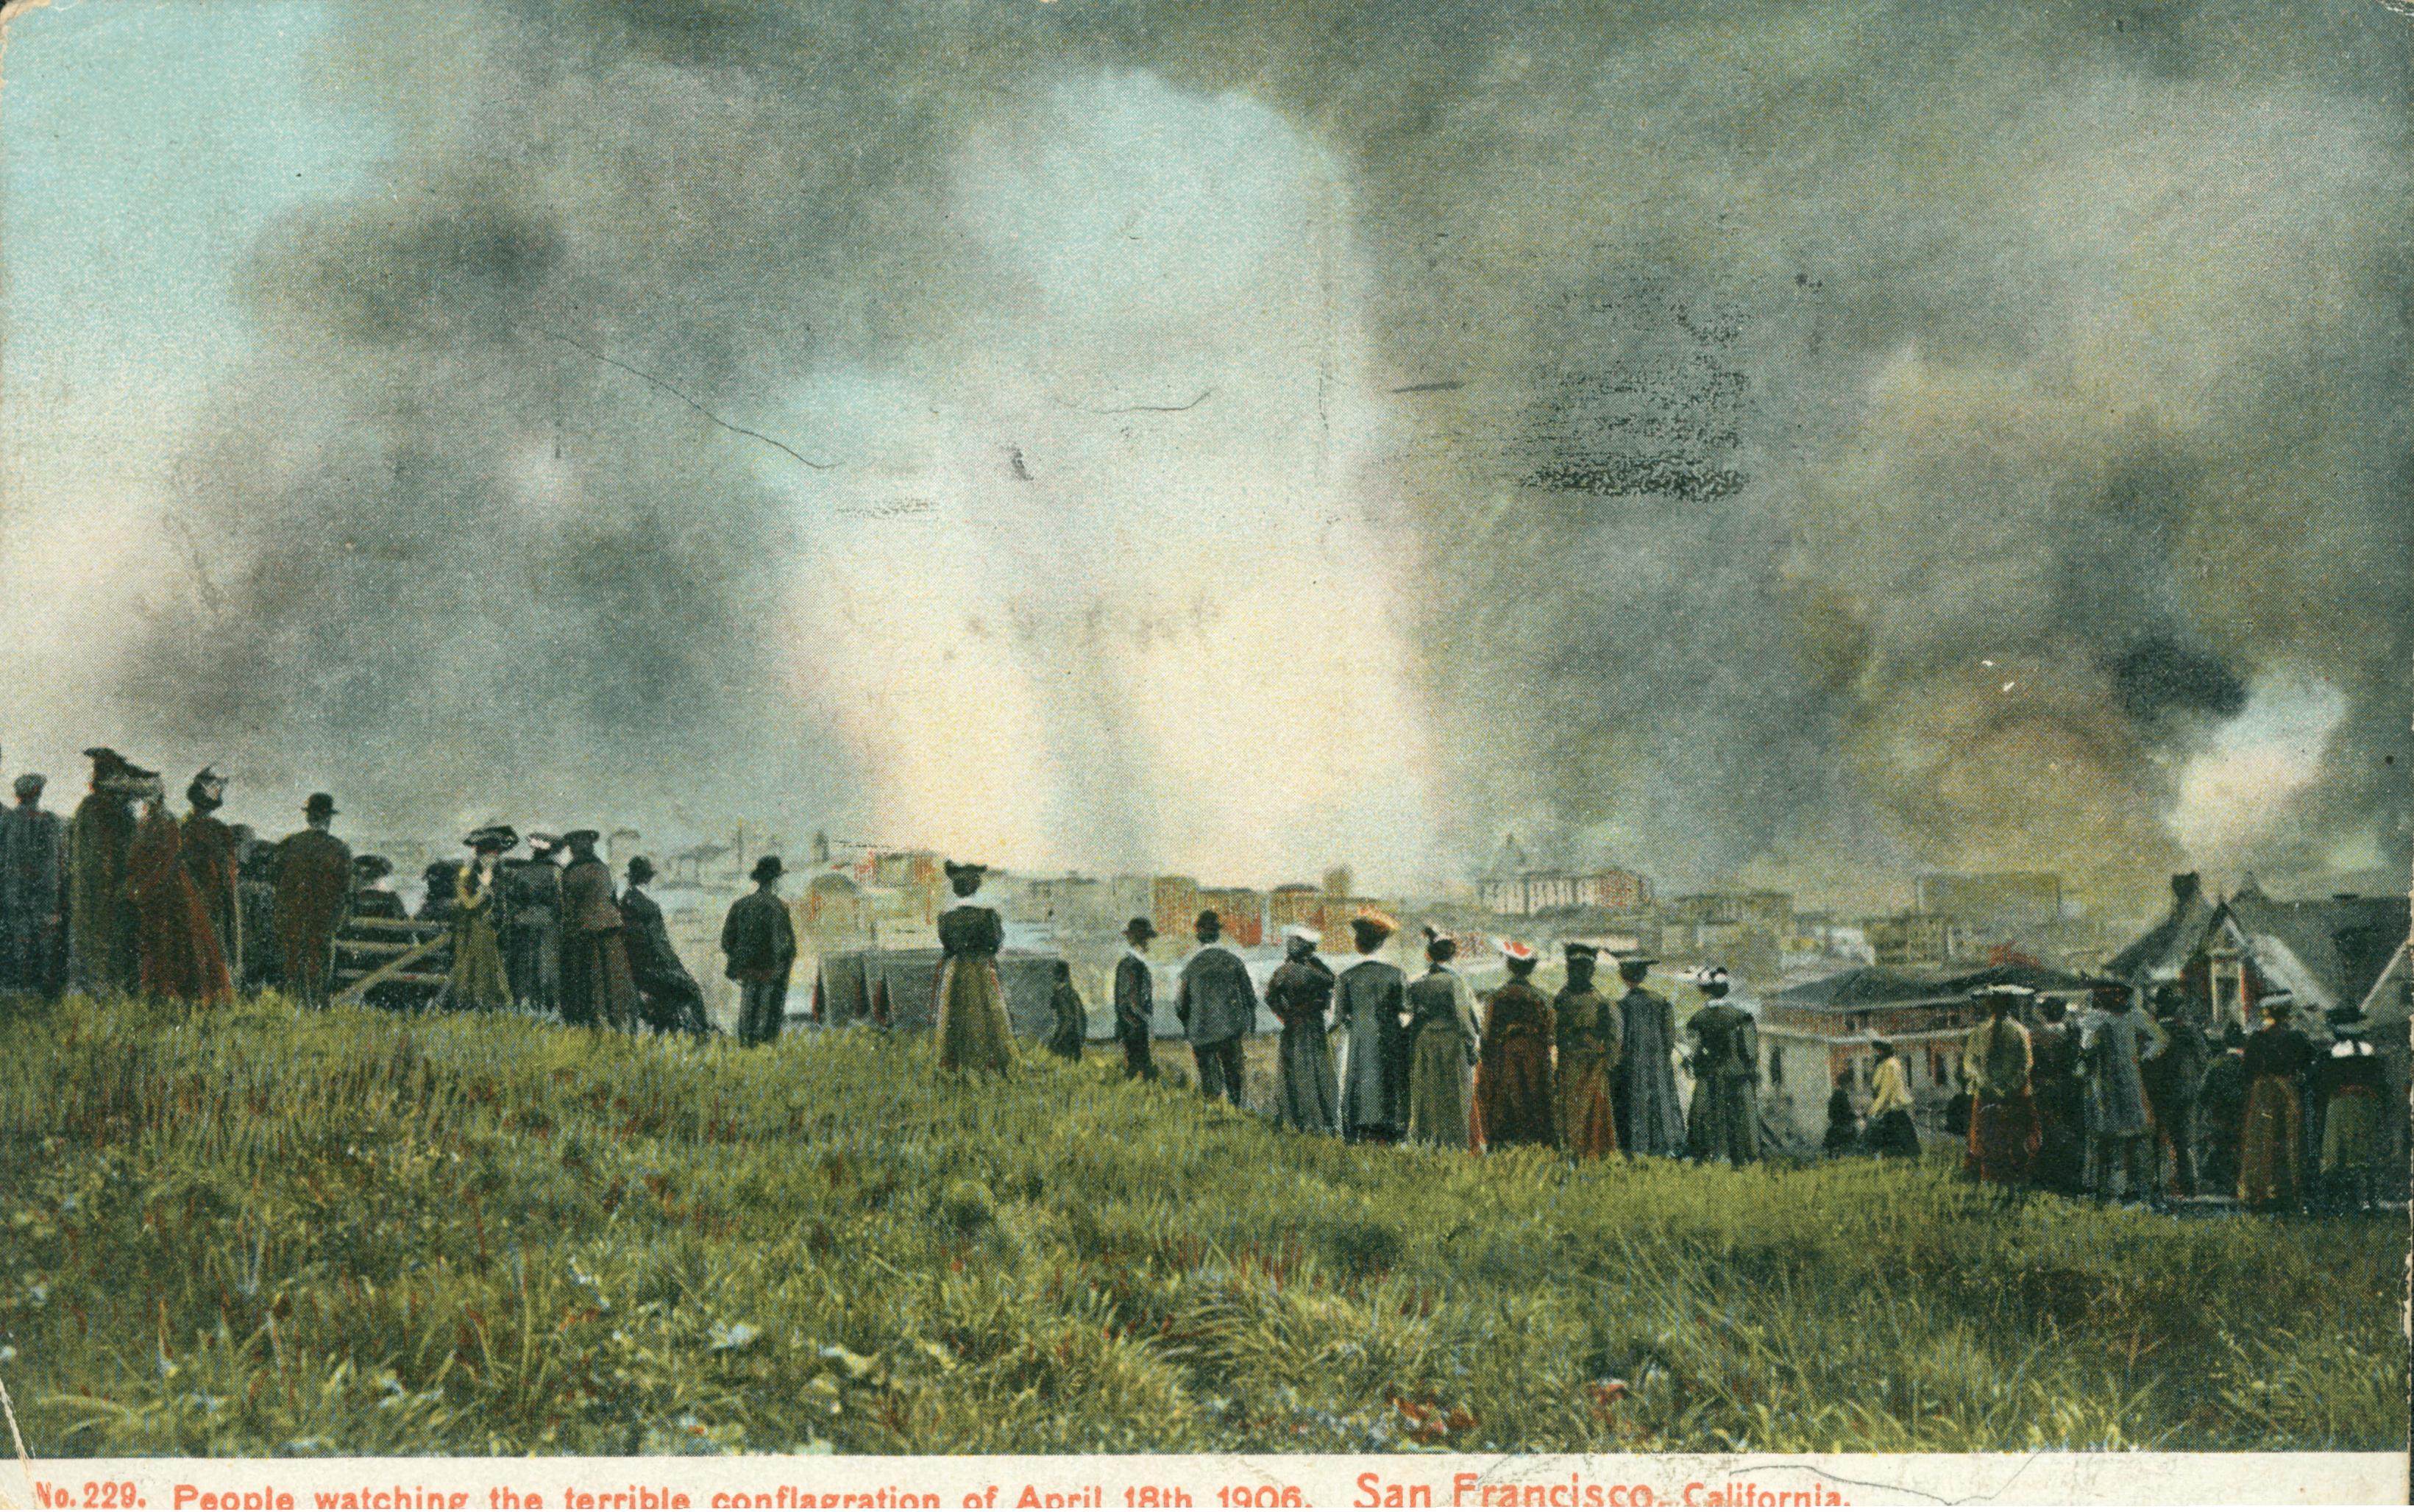 Shows a drawing of people watching the fire in San Francisco.